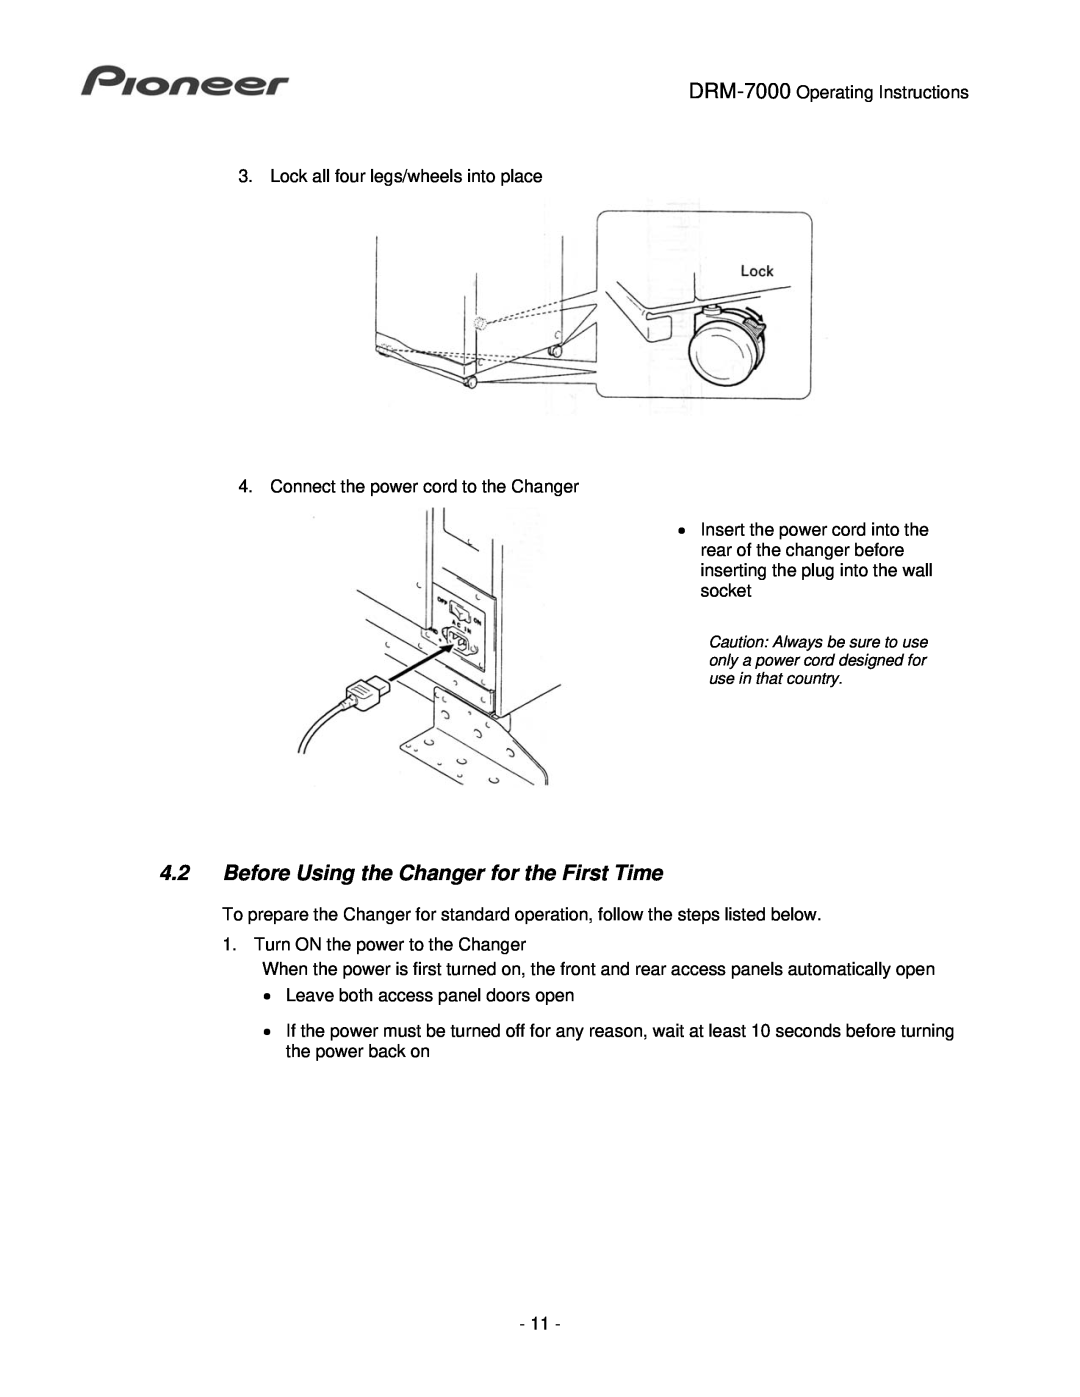 Pioneer DRM-7000 operating instructions 4.2Before Using the Changer for the First Time 